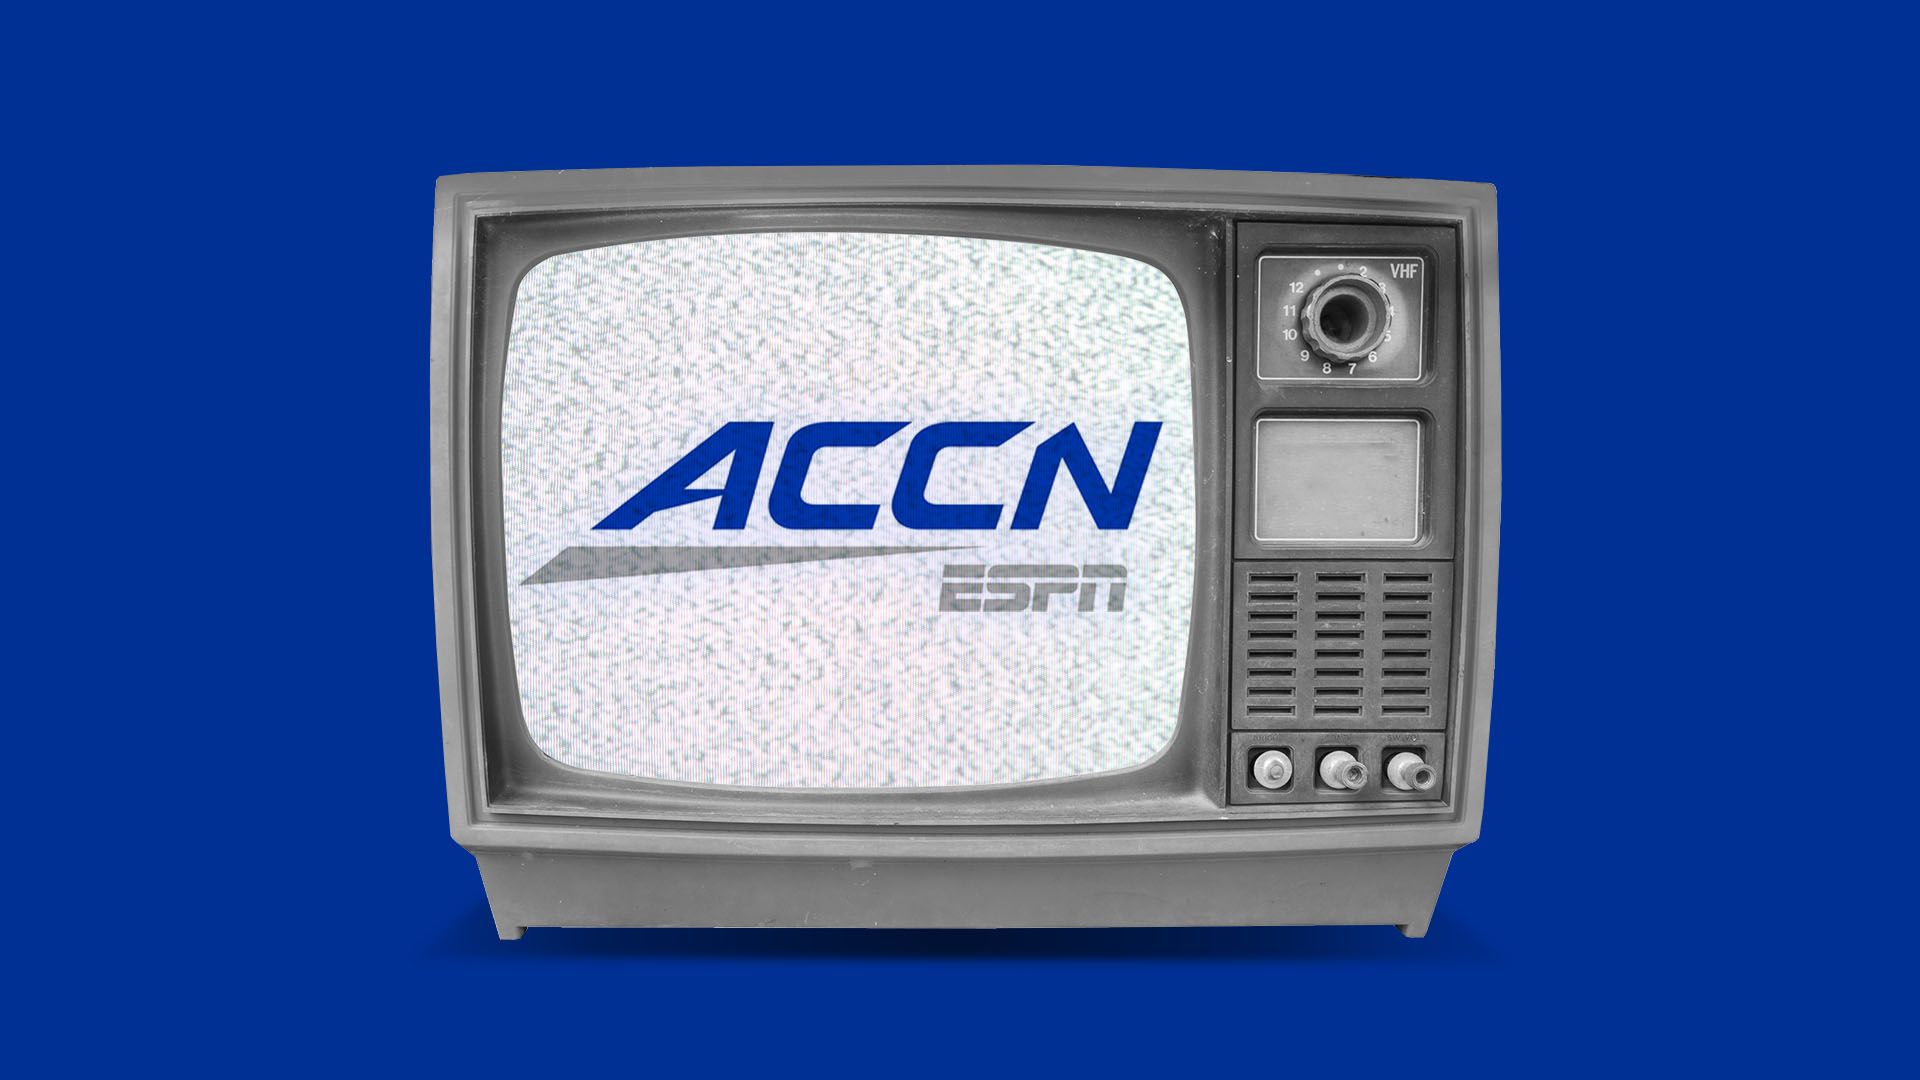 Illustration of the ACCN logo on a television set